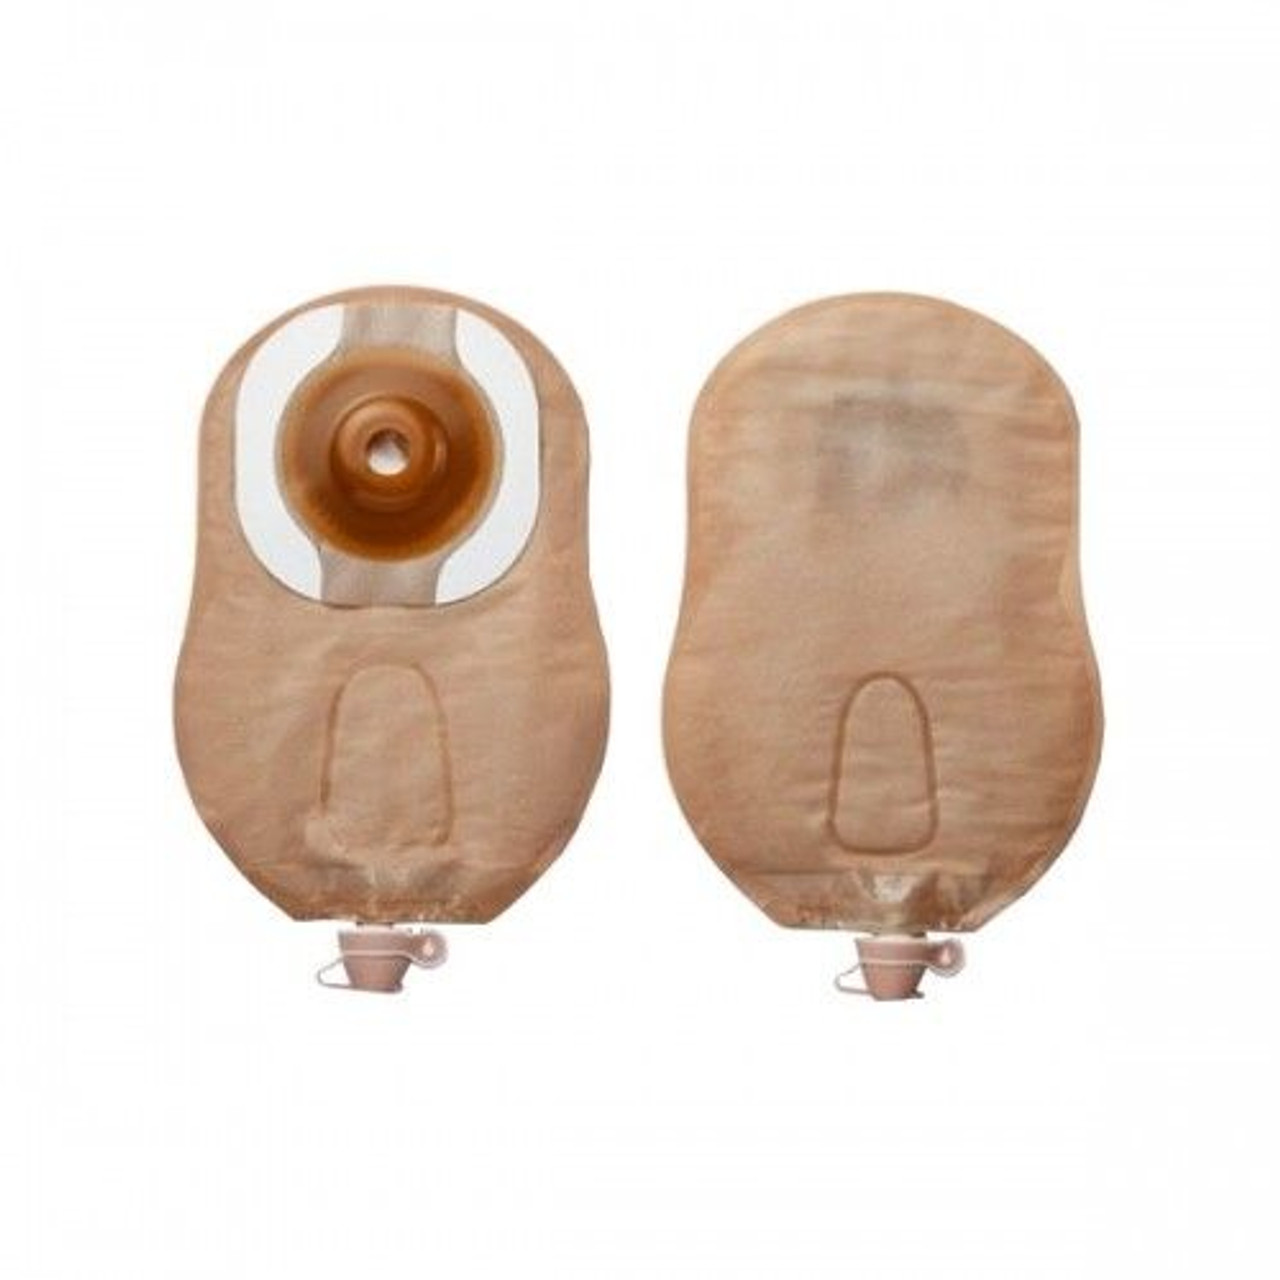 Hollister 84794 BX/5 PREMIER ONE PIECE UROSTOMY, FLEXTEND, W/ CONVEX, CUT TO FIT, UP TO 1" (25MM), ULTRA CLEAR.